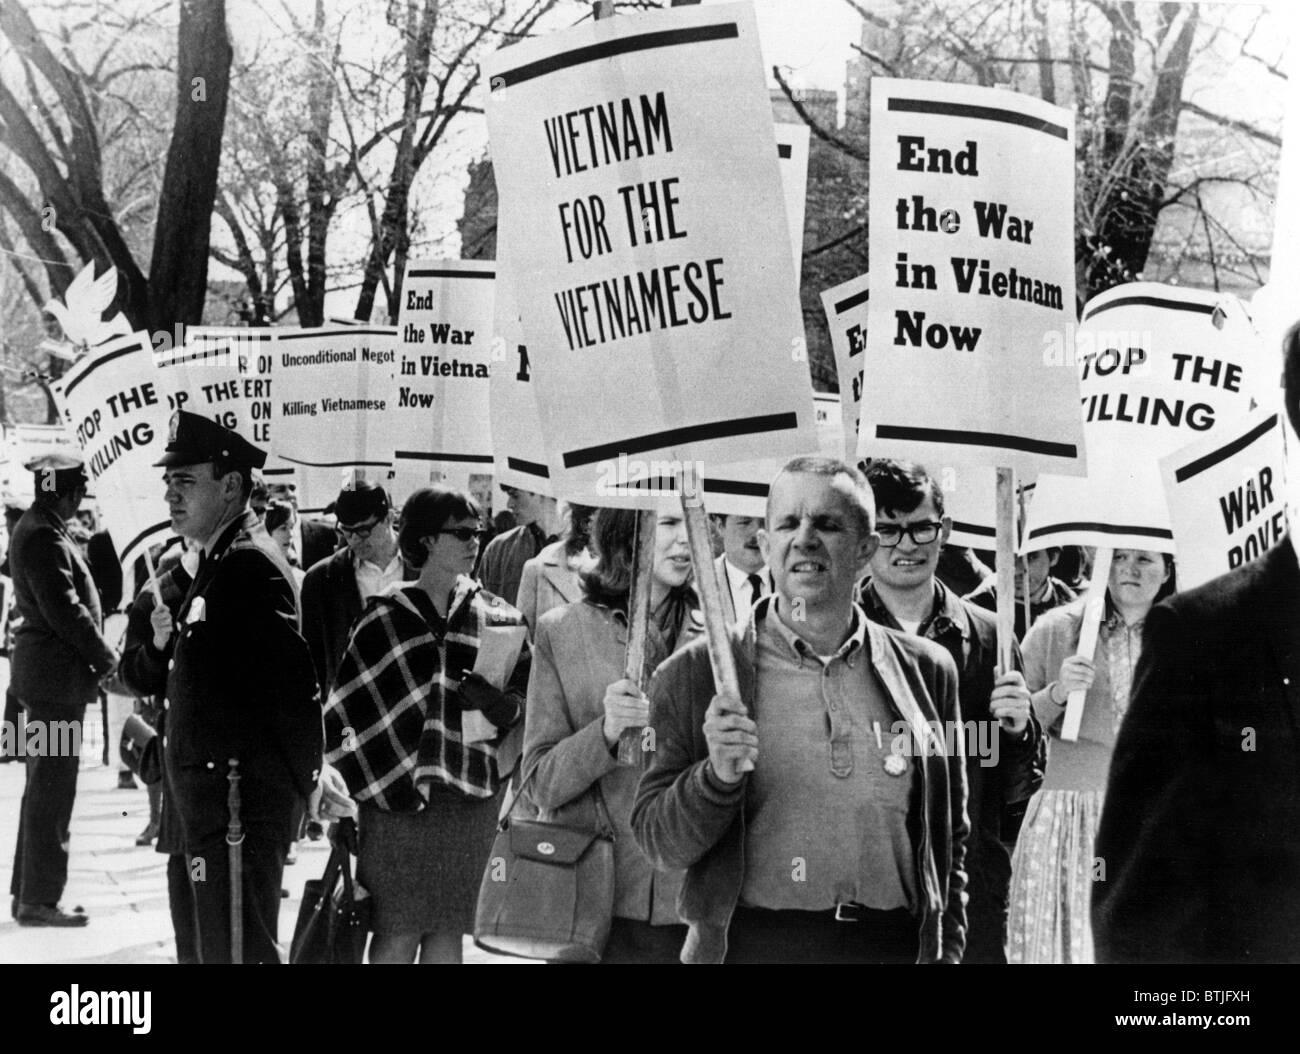 4/17/65 WASHINGTON. D.C.: 5,000 students picketed in front of the White House to protest the U.S. policy in Southeast Asia and d Stock Photo